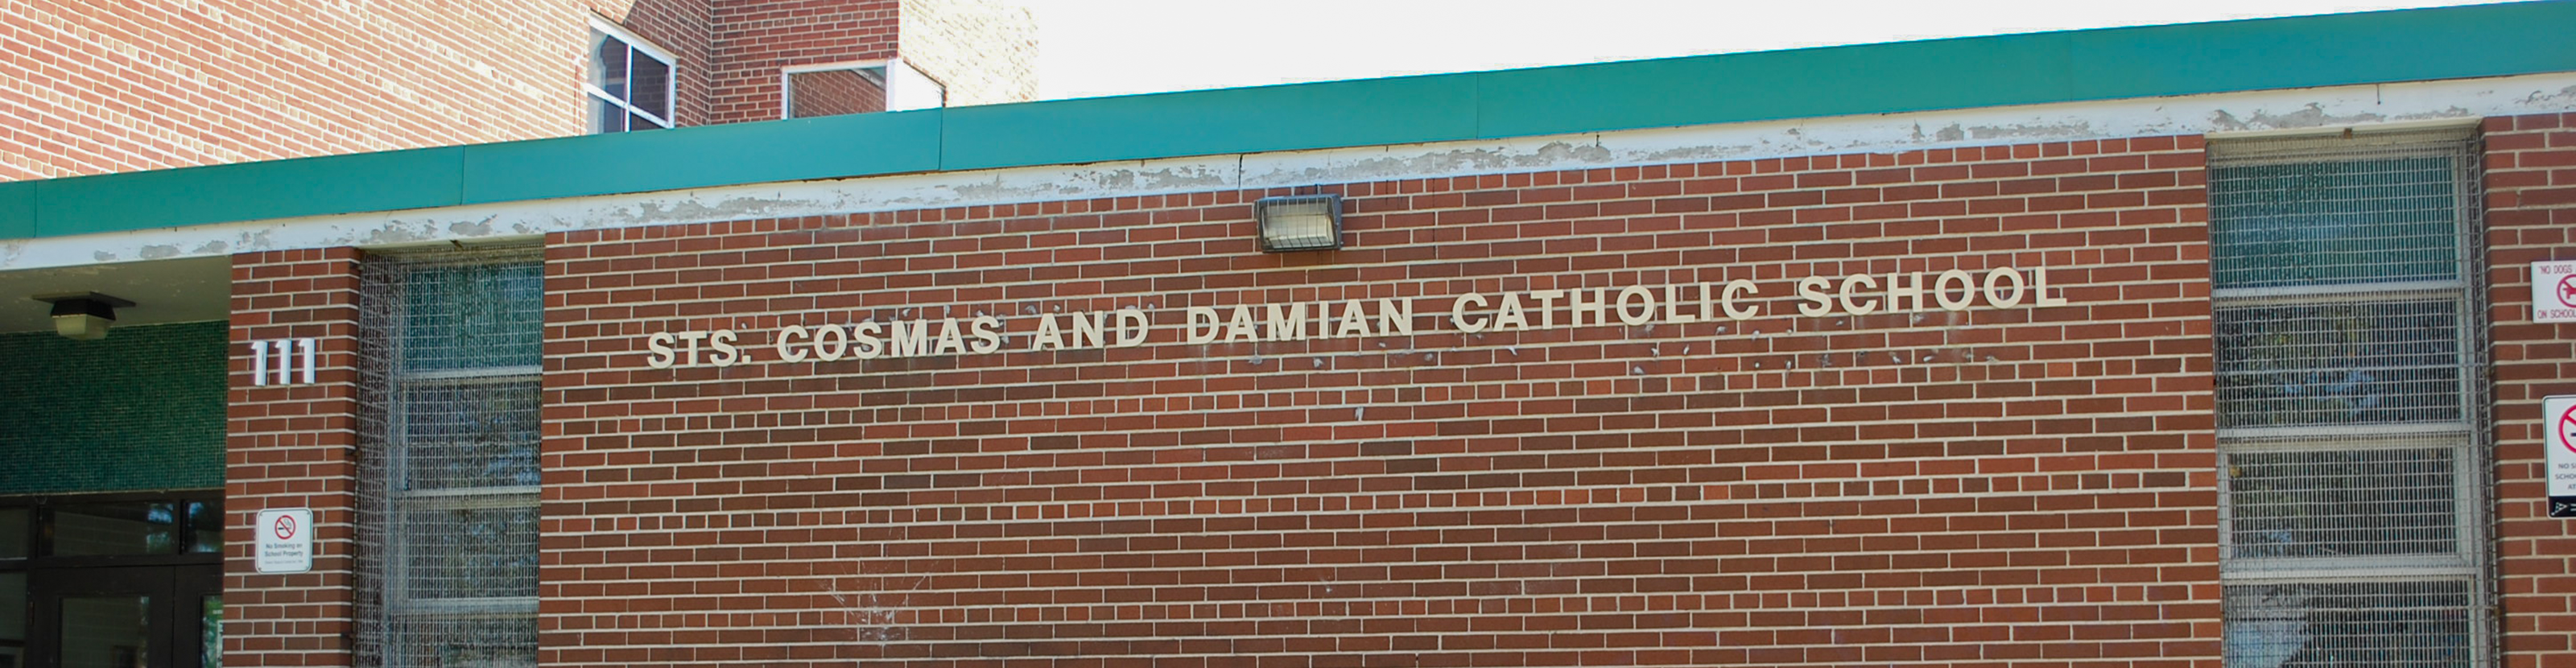 The front of the Sts. Cosmas and Damian Catholic School building.